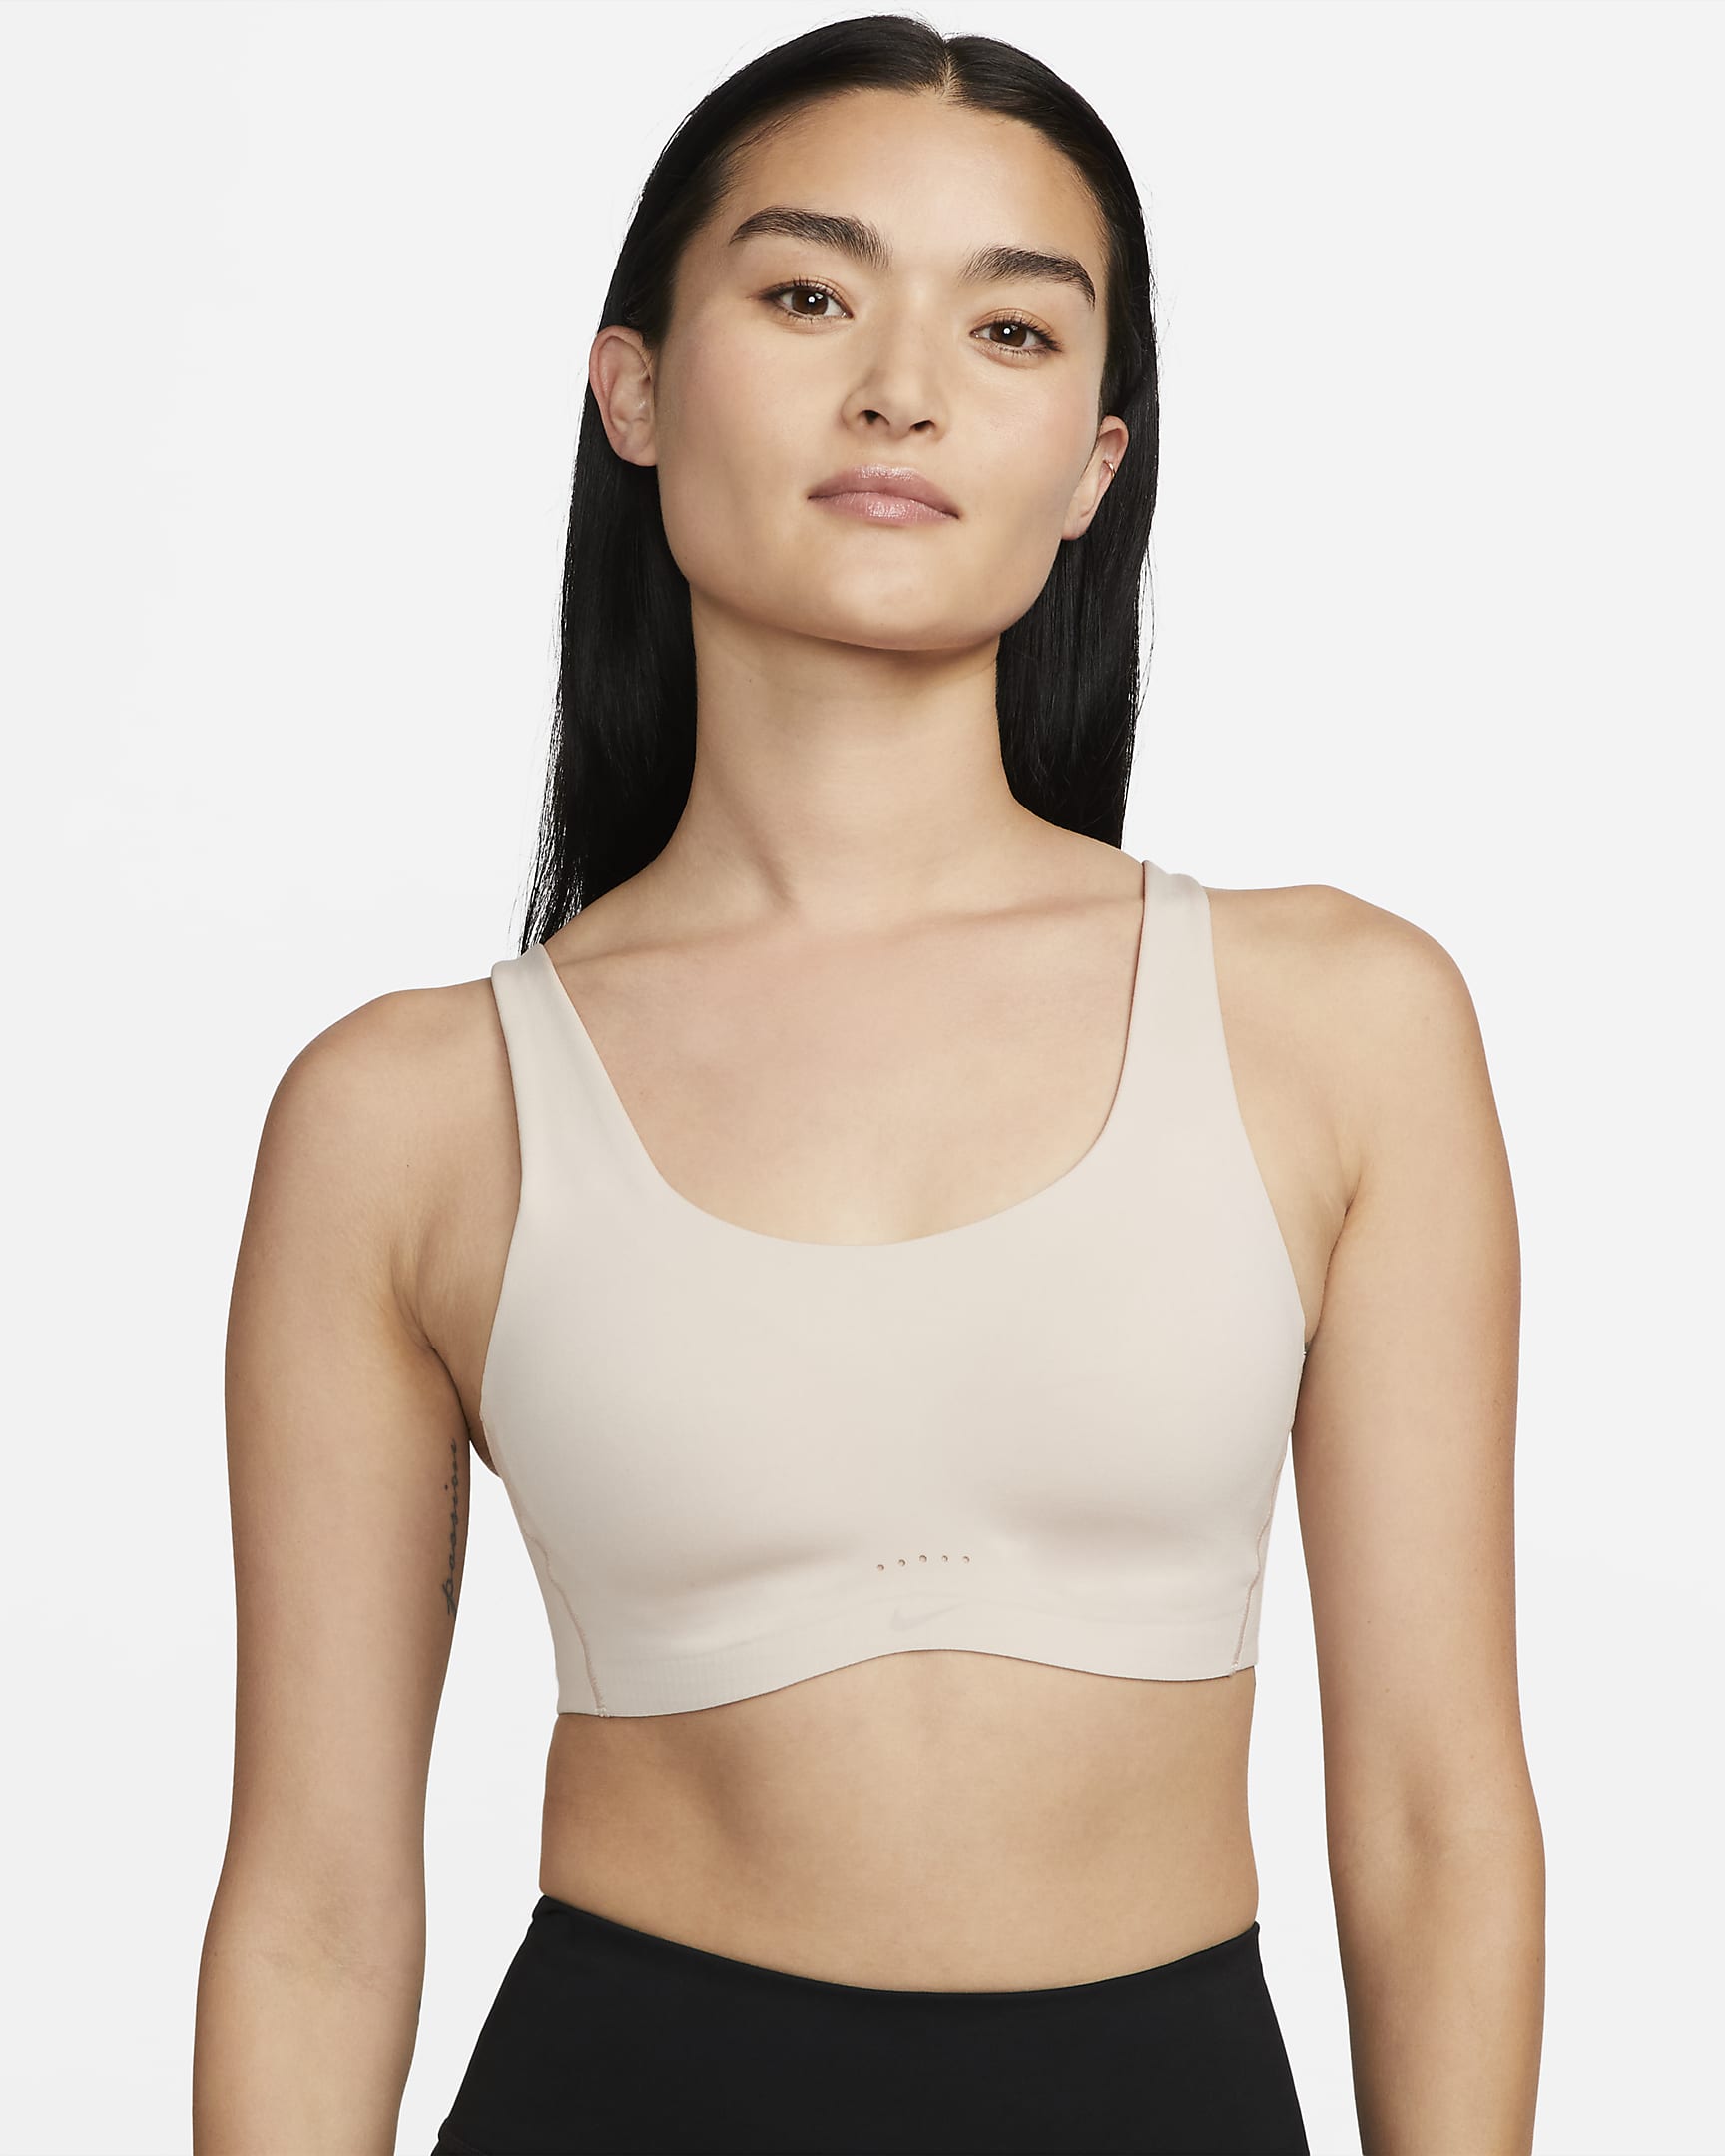 Nike Dri-FIT Alate Coverage Women's Light-Support Padded Sports Bra - Particle Beige/Particle Beige/Dusted Clay